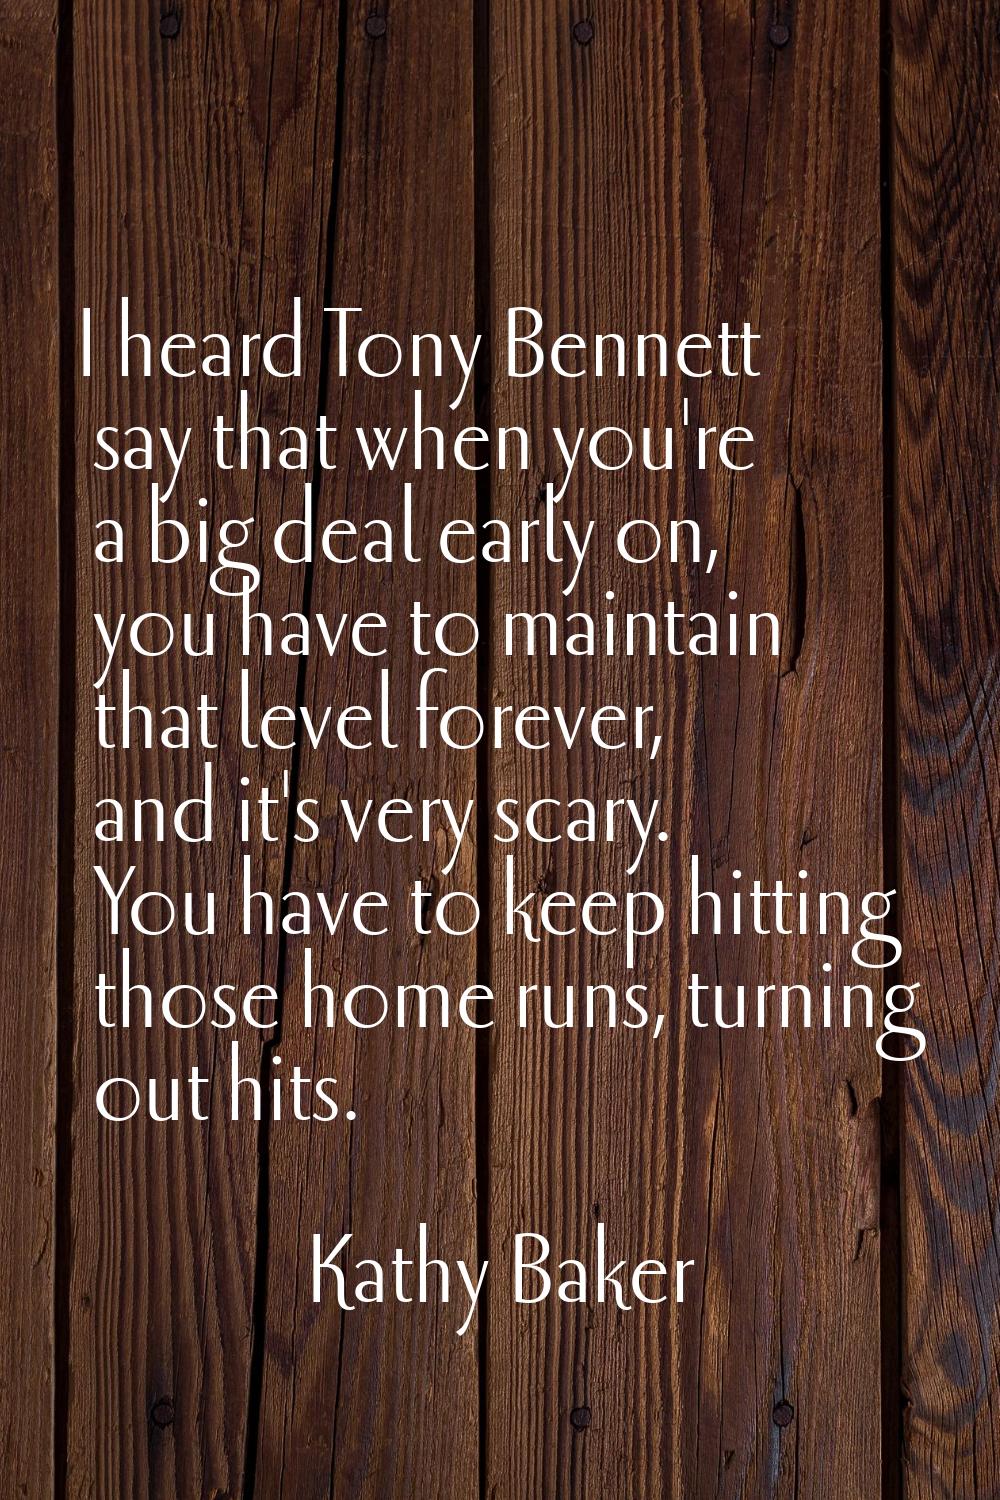 I heard Tony Bennett say that when you're a big deal early on, you have to maintain that level fore